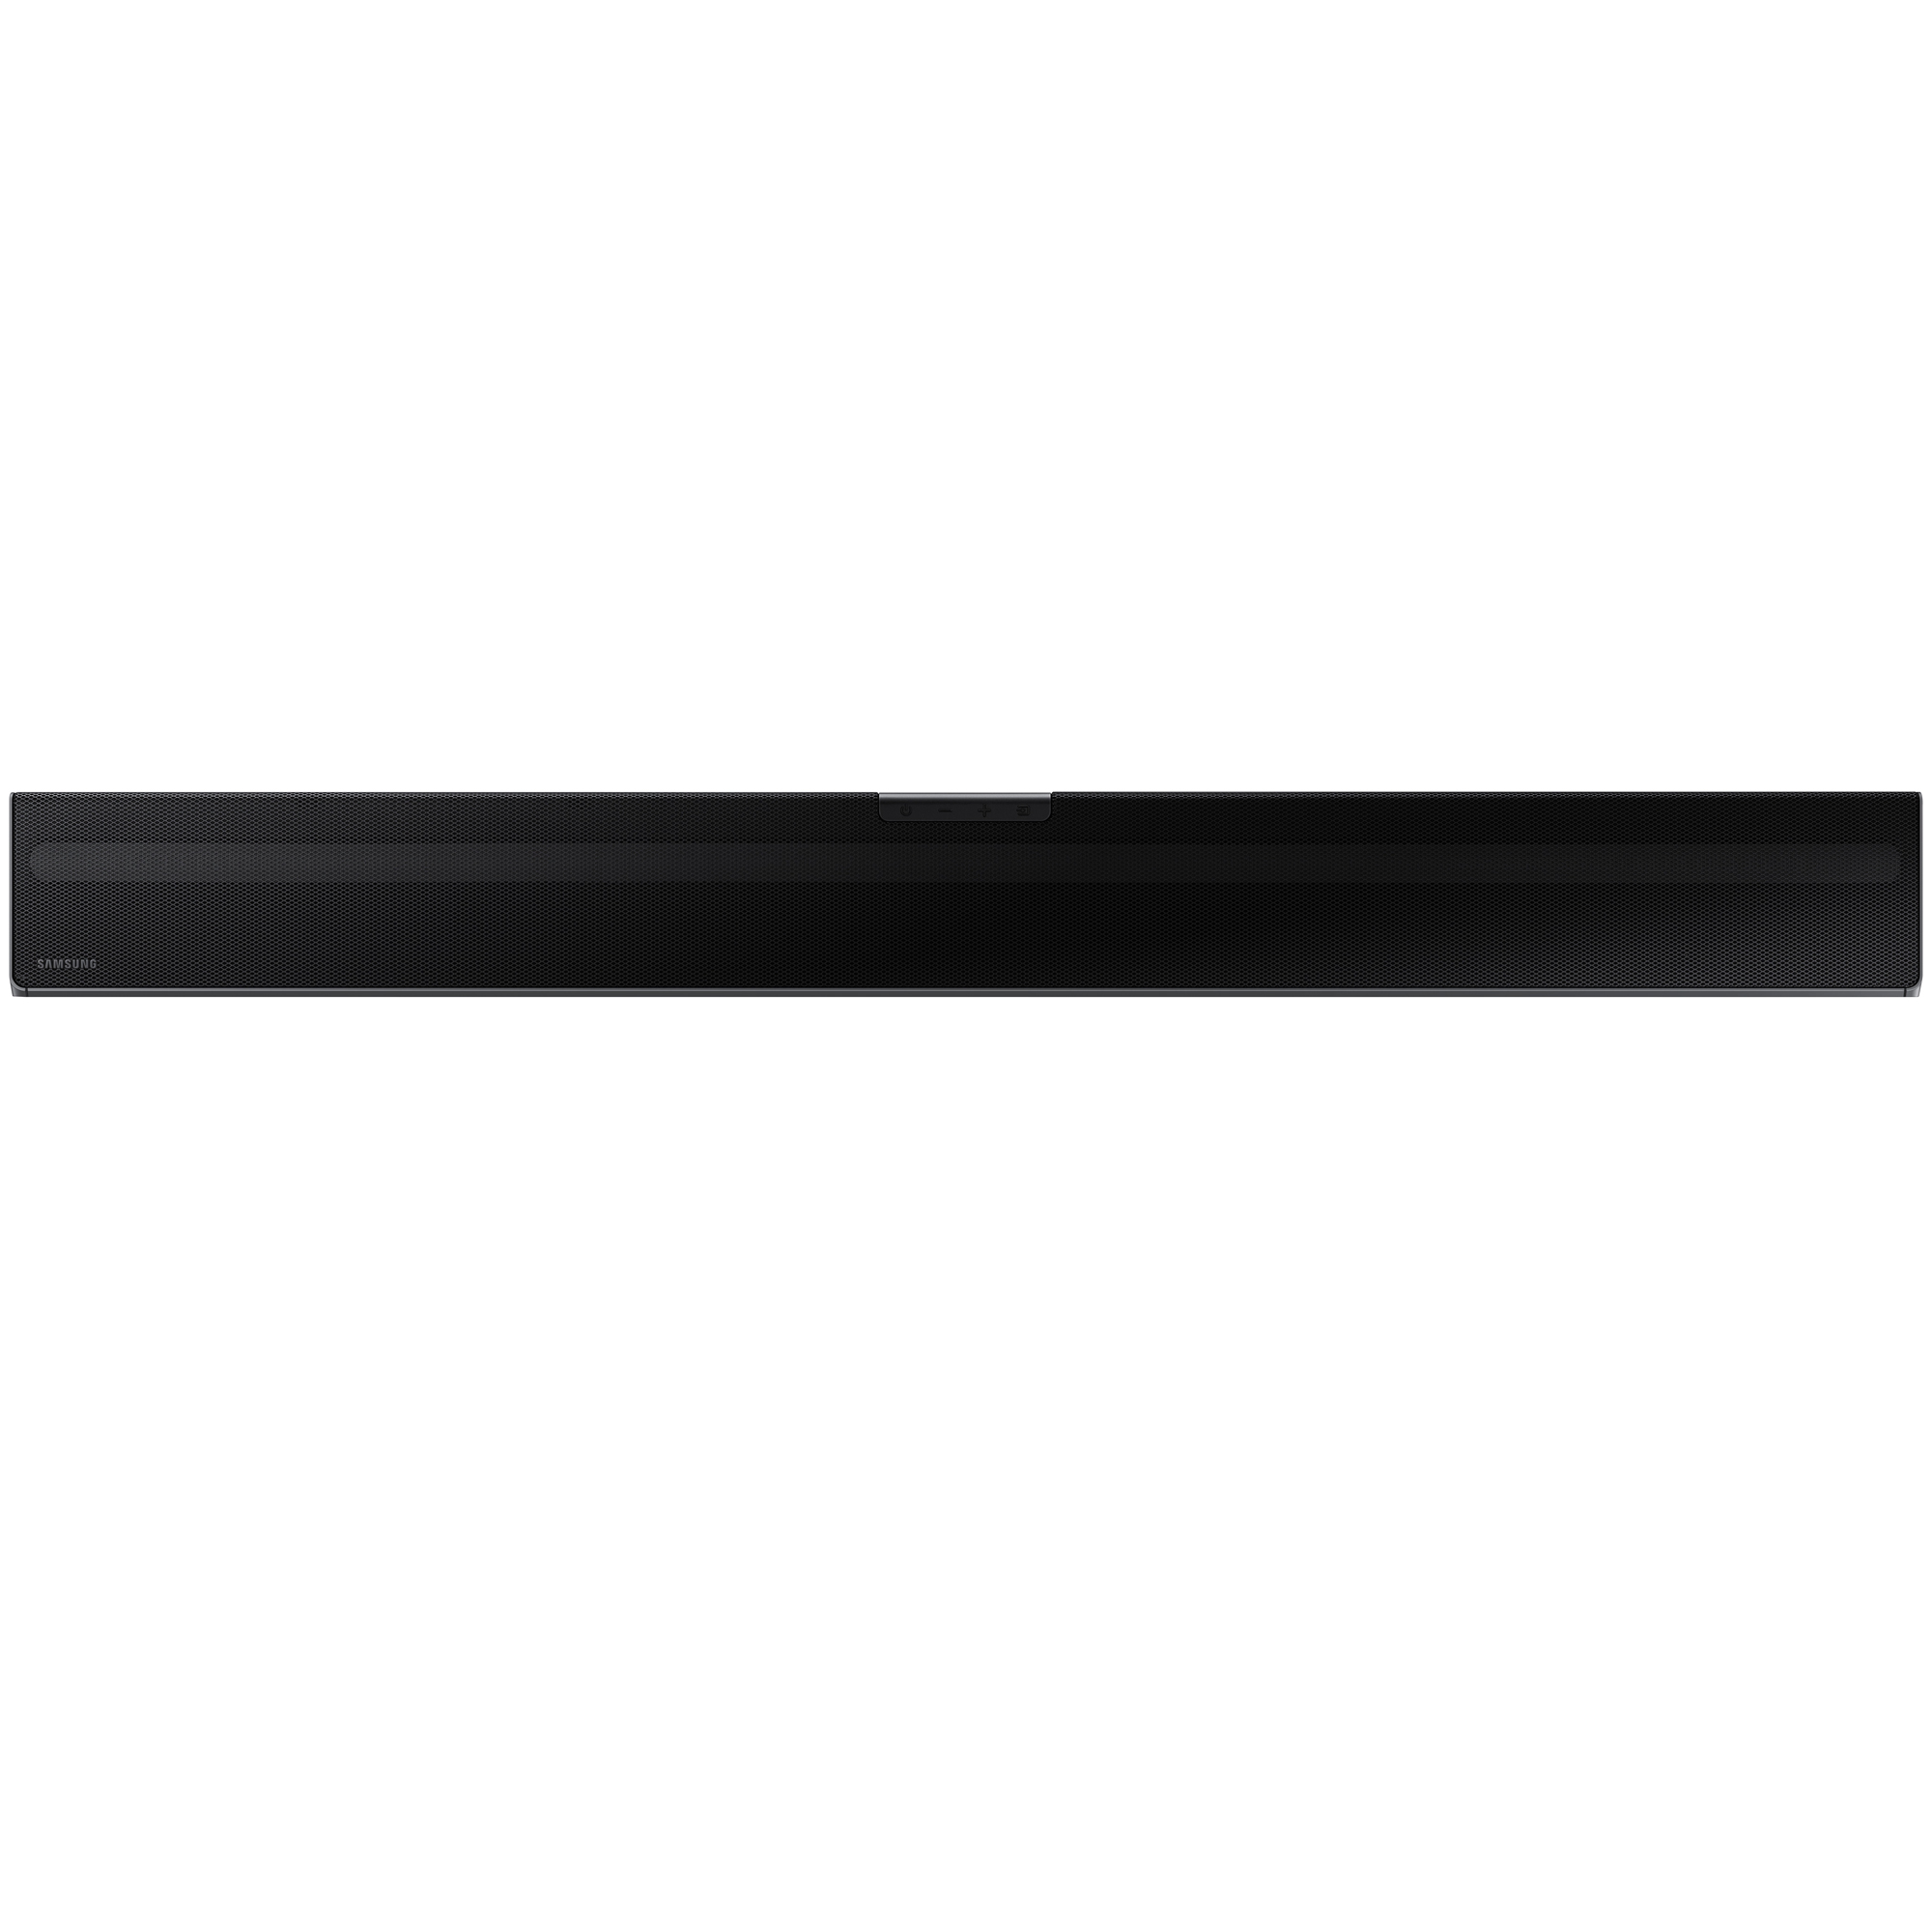 Samsung HW-Q60T 5.1ch Acoustic Beam Soundbar with Dolby Digital 5.1 / DTS Virtual:X Theater 3D Surround Sound Q Series Bundle With 2x Deco Gear HDMI Cables + Streaming Kit + Extended Coverage - image 4 of 9